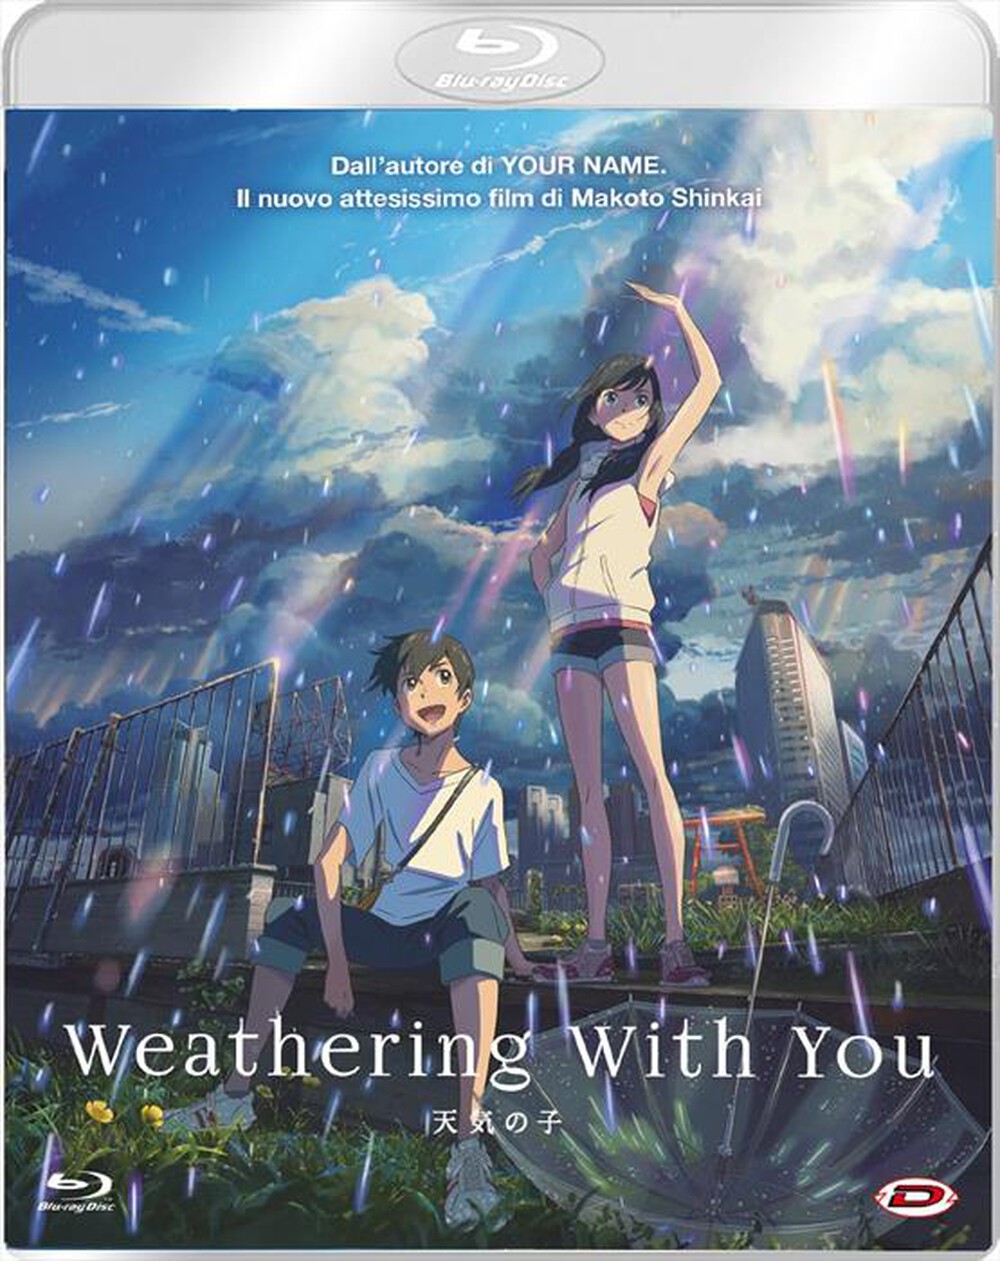 "DYNIT - Weathering With You"